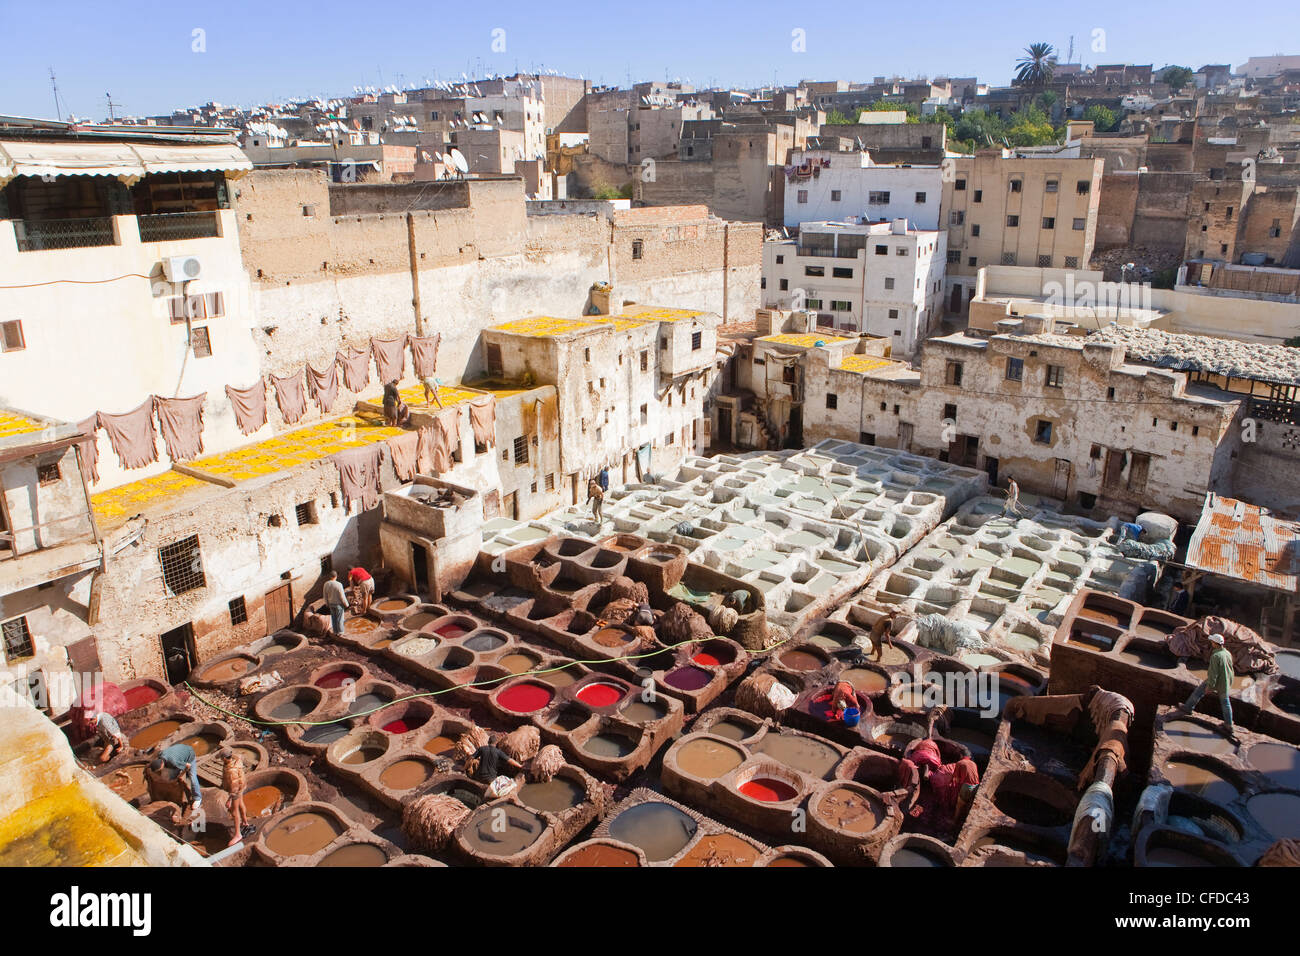 Tannery, Fez, UNESCO World Heritage Site, Morocco, North Africa, Africa Stock Photo